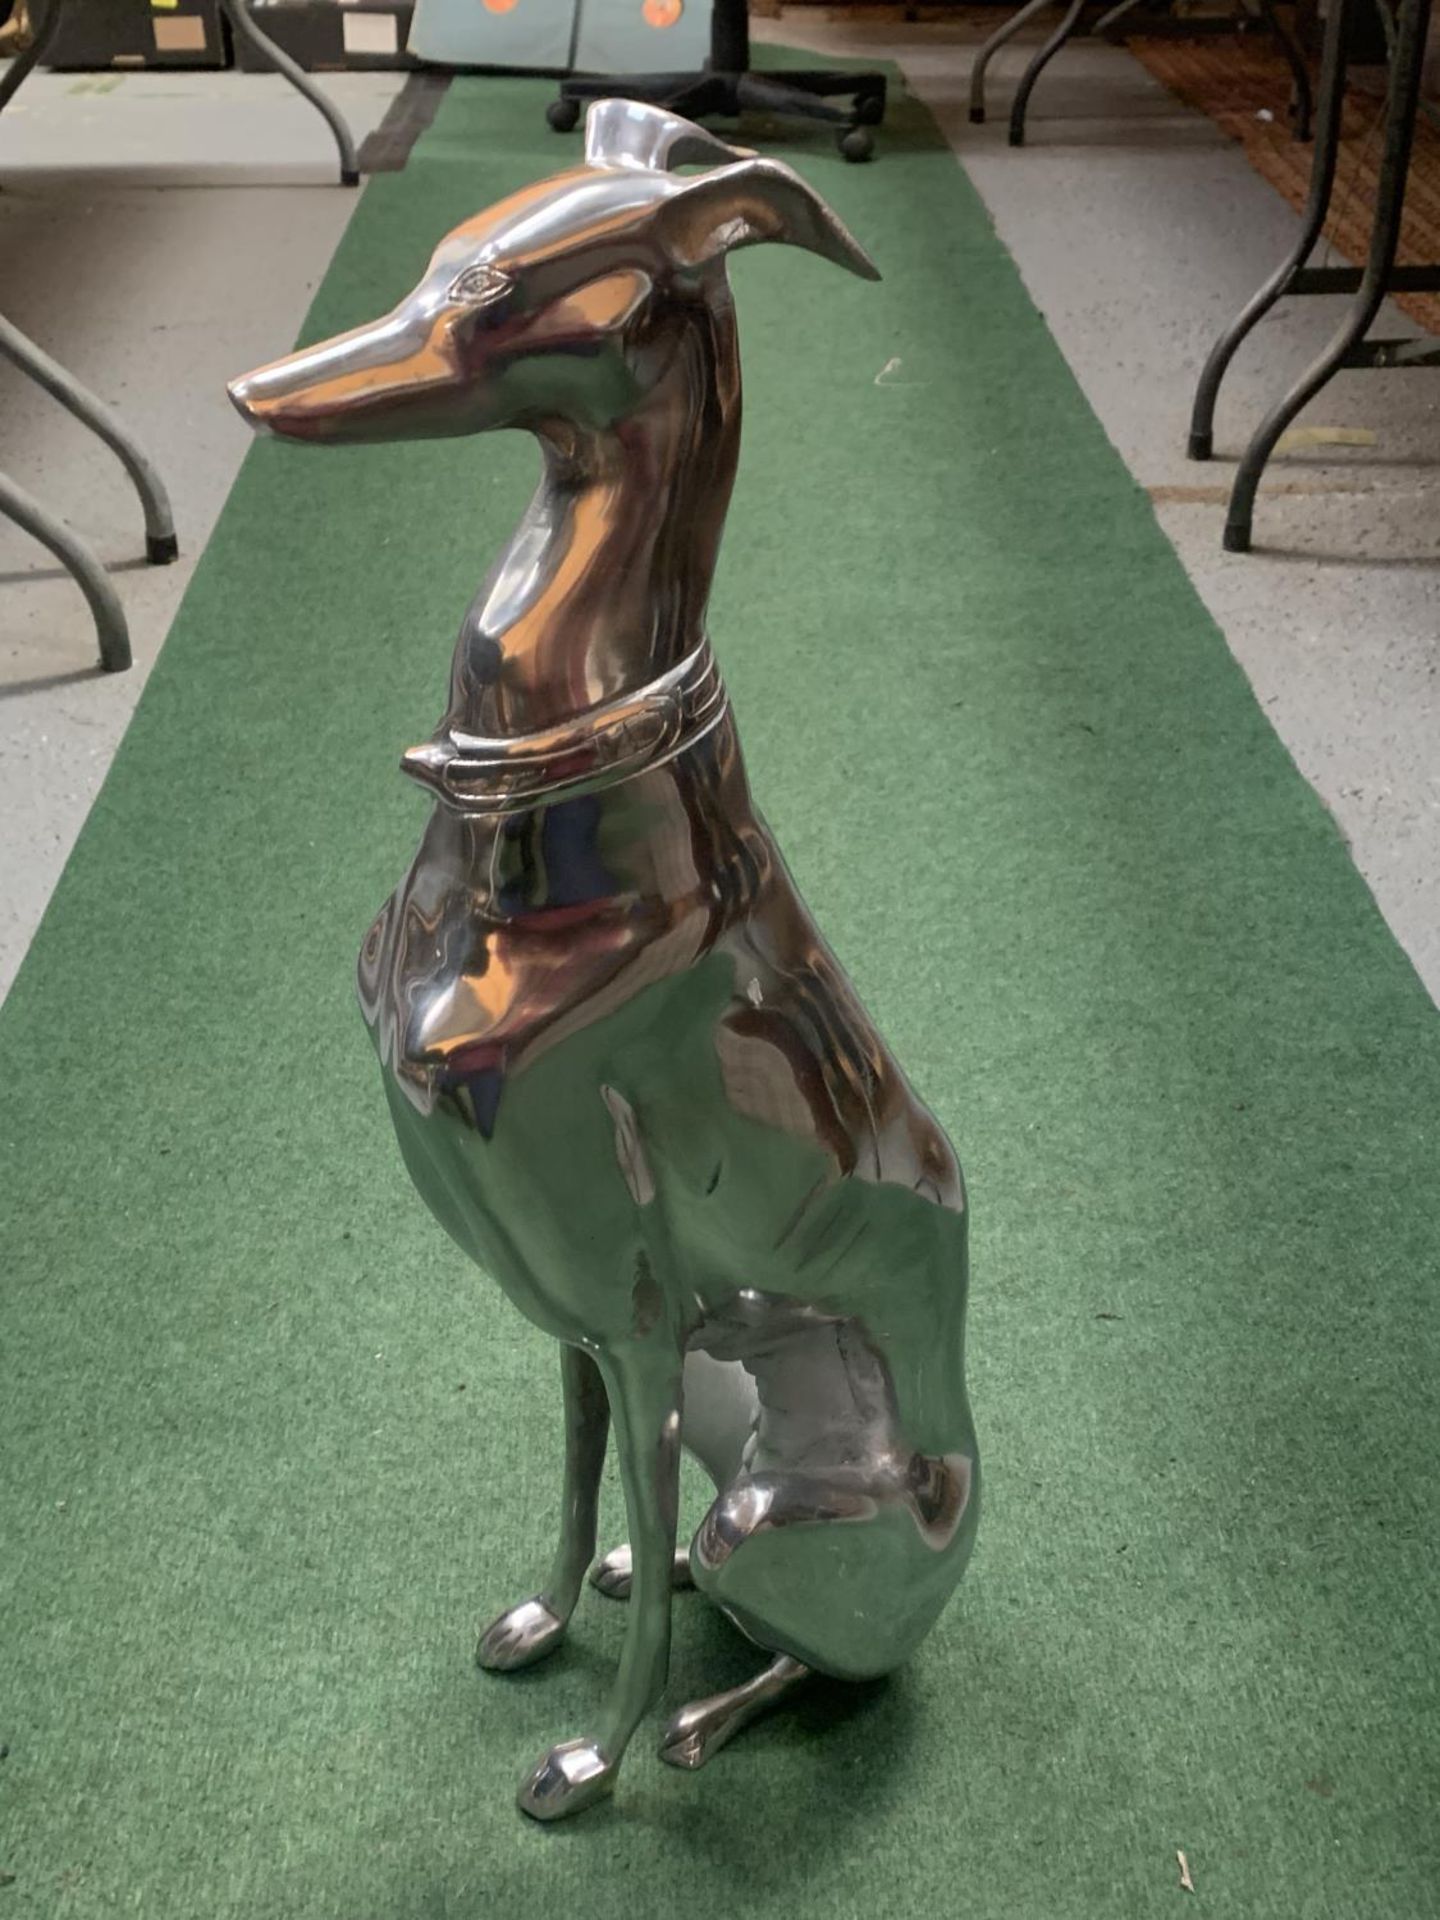 A LARGE CHROME GREYHOUND IN A SITTING POSITION 70CM HIGH